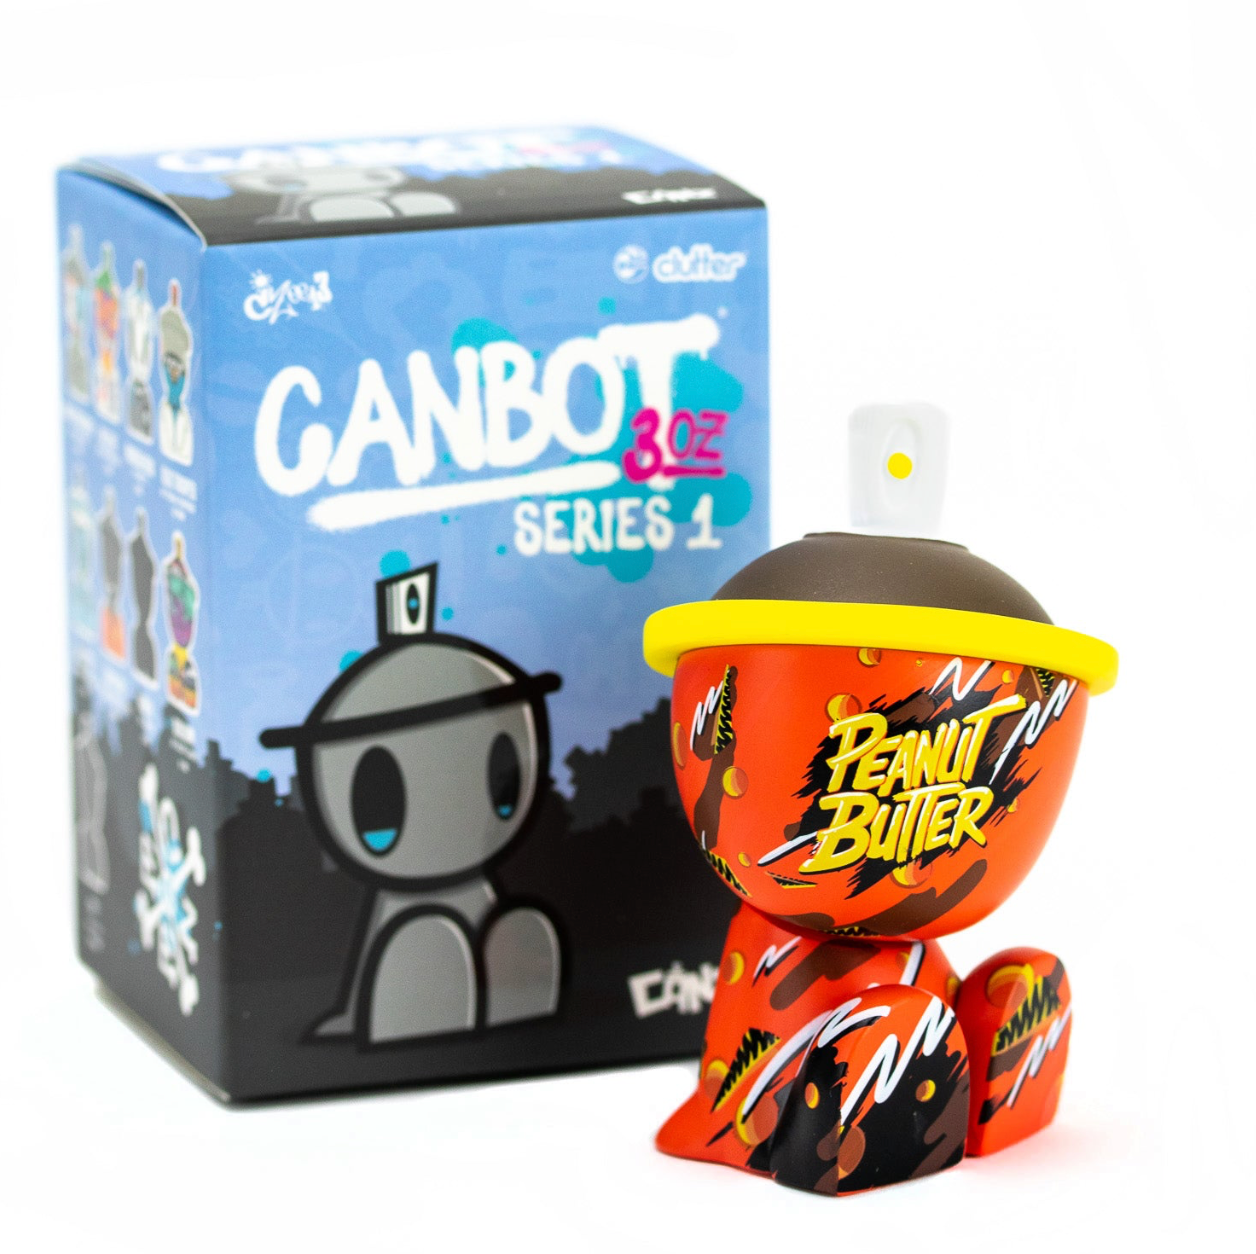 Canbot 3oz Blind Box Series 1 by Clutter Available Now